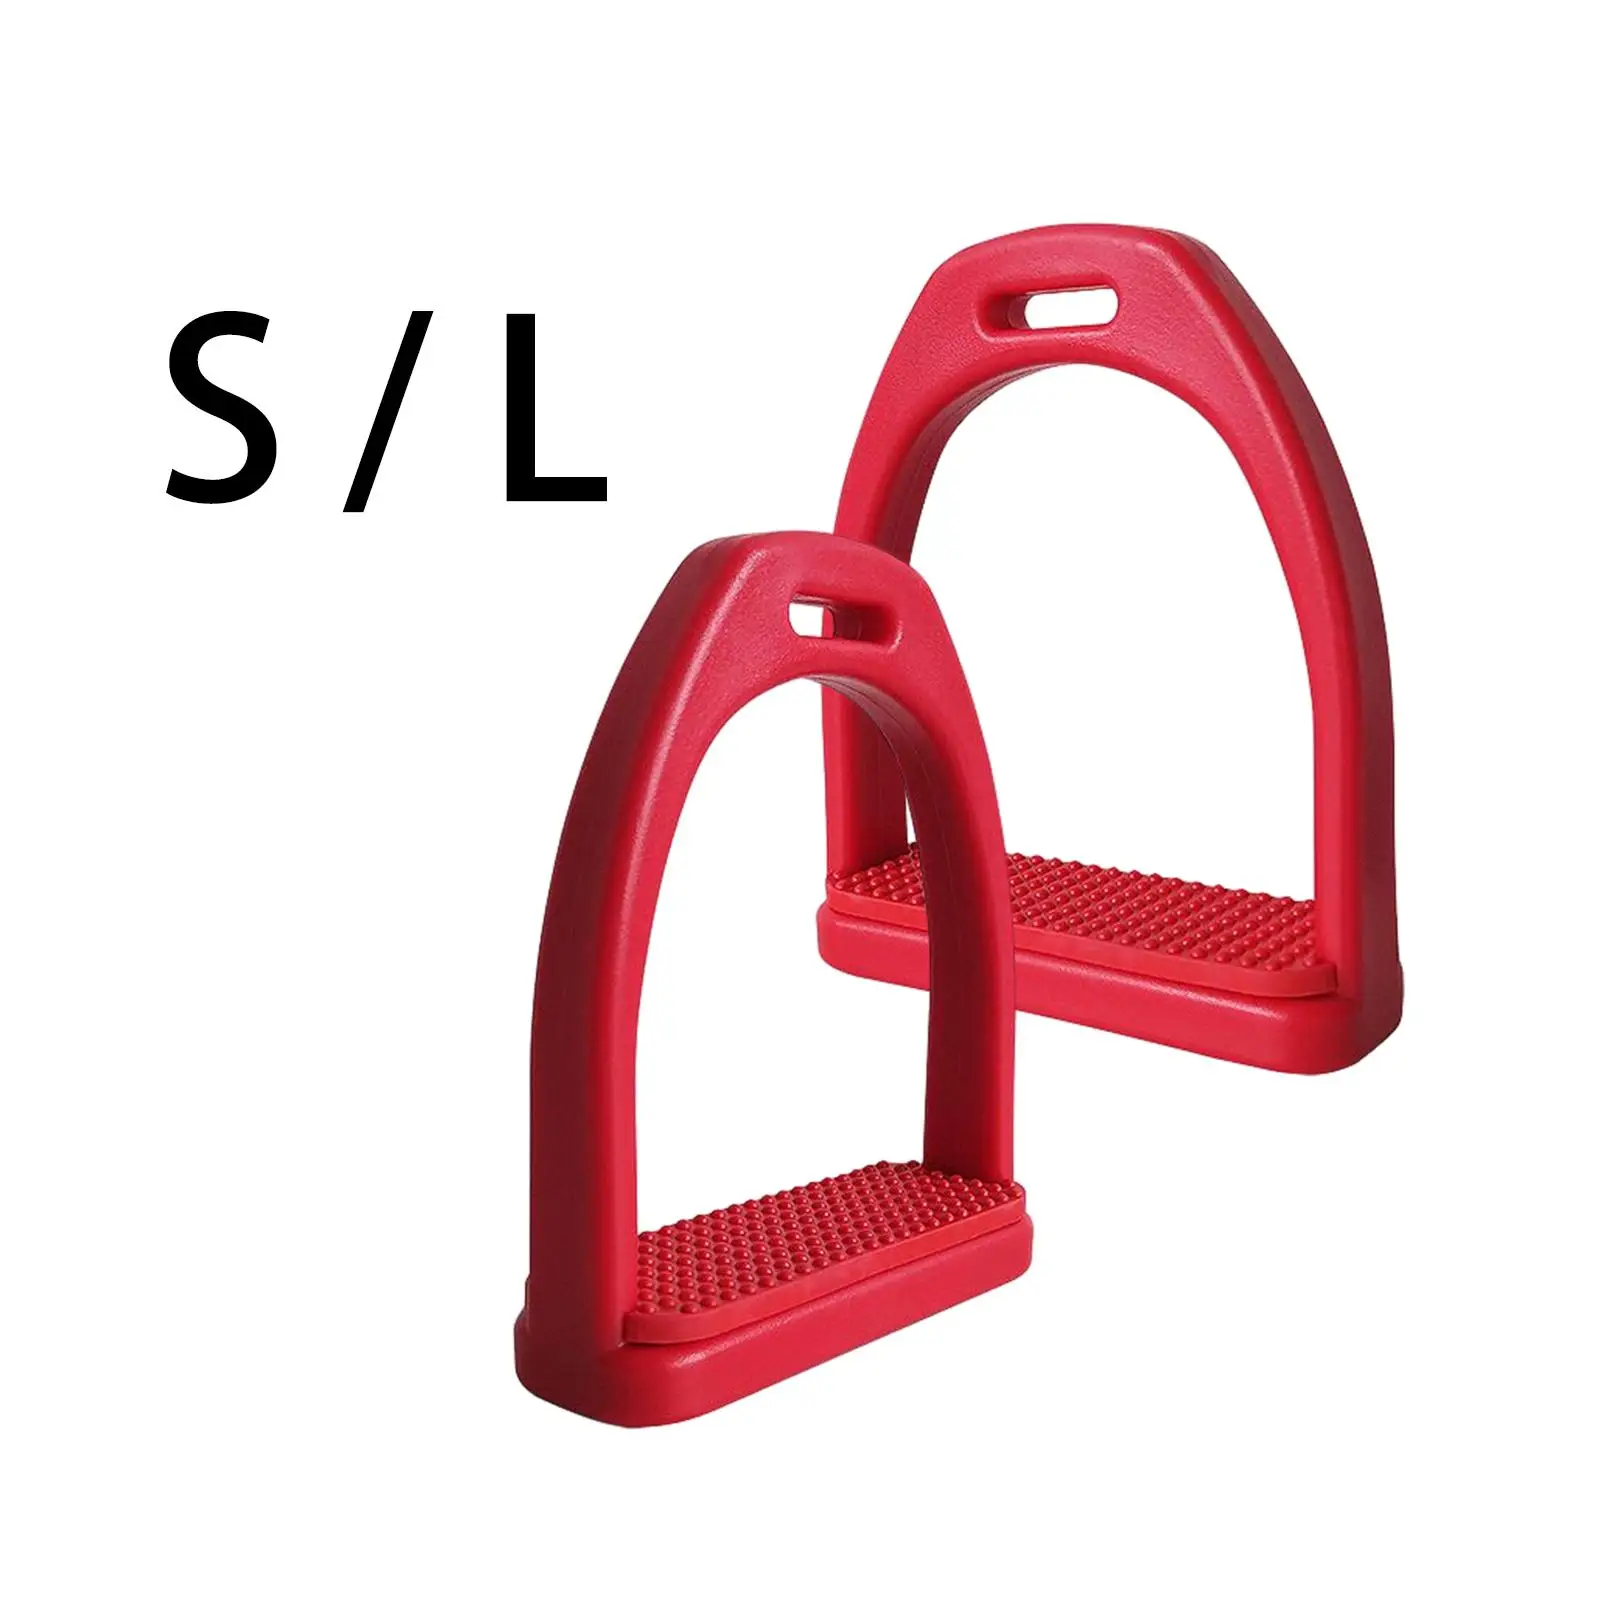 2Pcs Horse Riding Stirrups Equestrian Training Tool Non Slip High Strength for Horse Riding Outdoor Sports Kids Adults